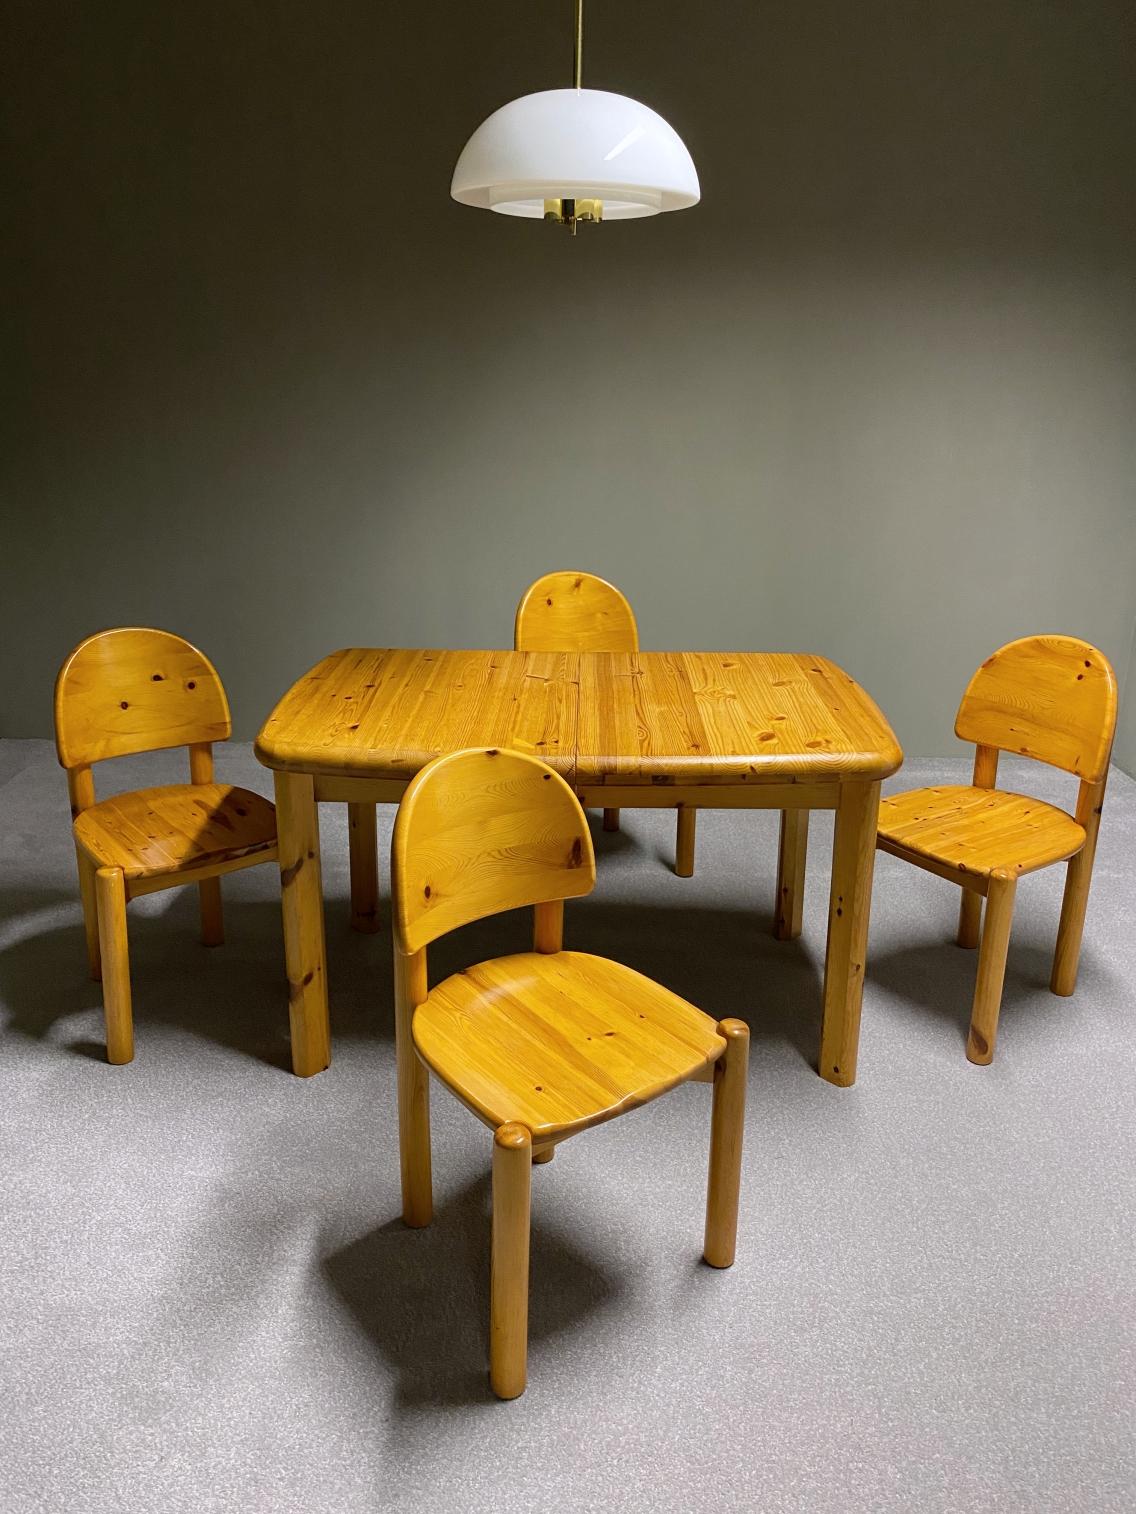 Outstanding combination of Scandinavian craftsmanship & design. Dining set designed by Rainer Daumiller and manufactured by Hirtshals Savvaerk Møbler. The set is made of solid pine wood. Very comfortable seating thanks to the ergonomically design.